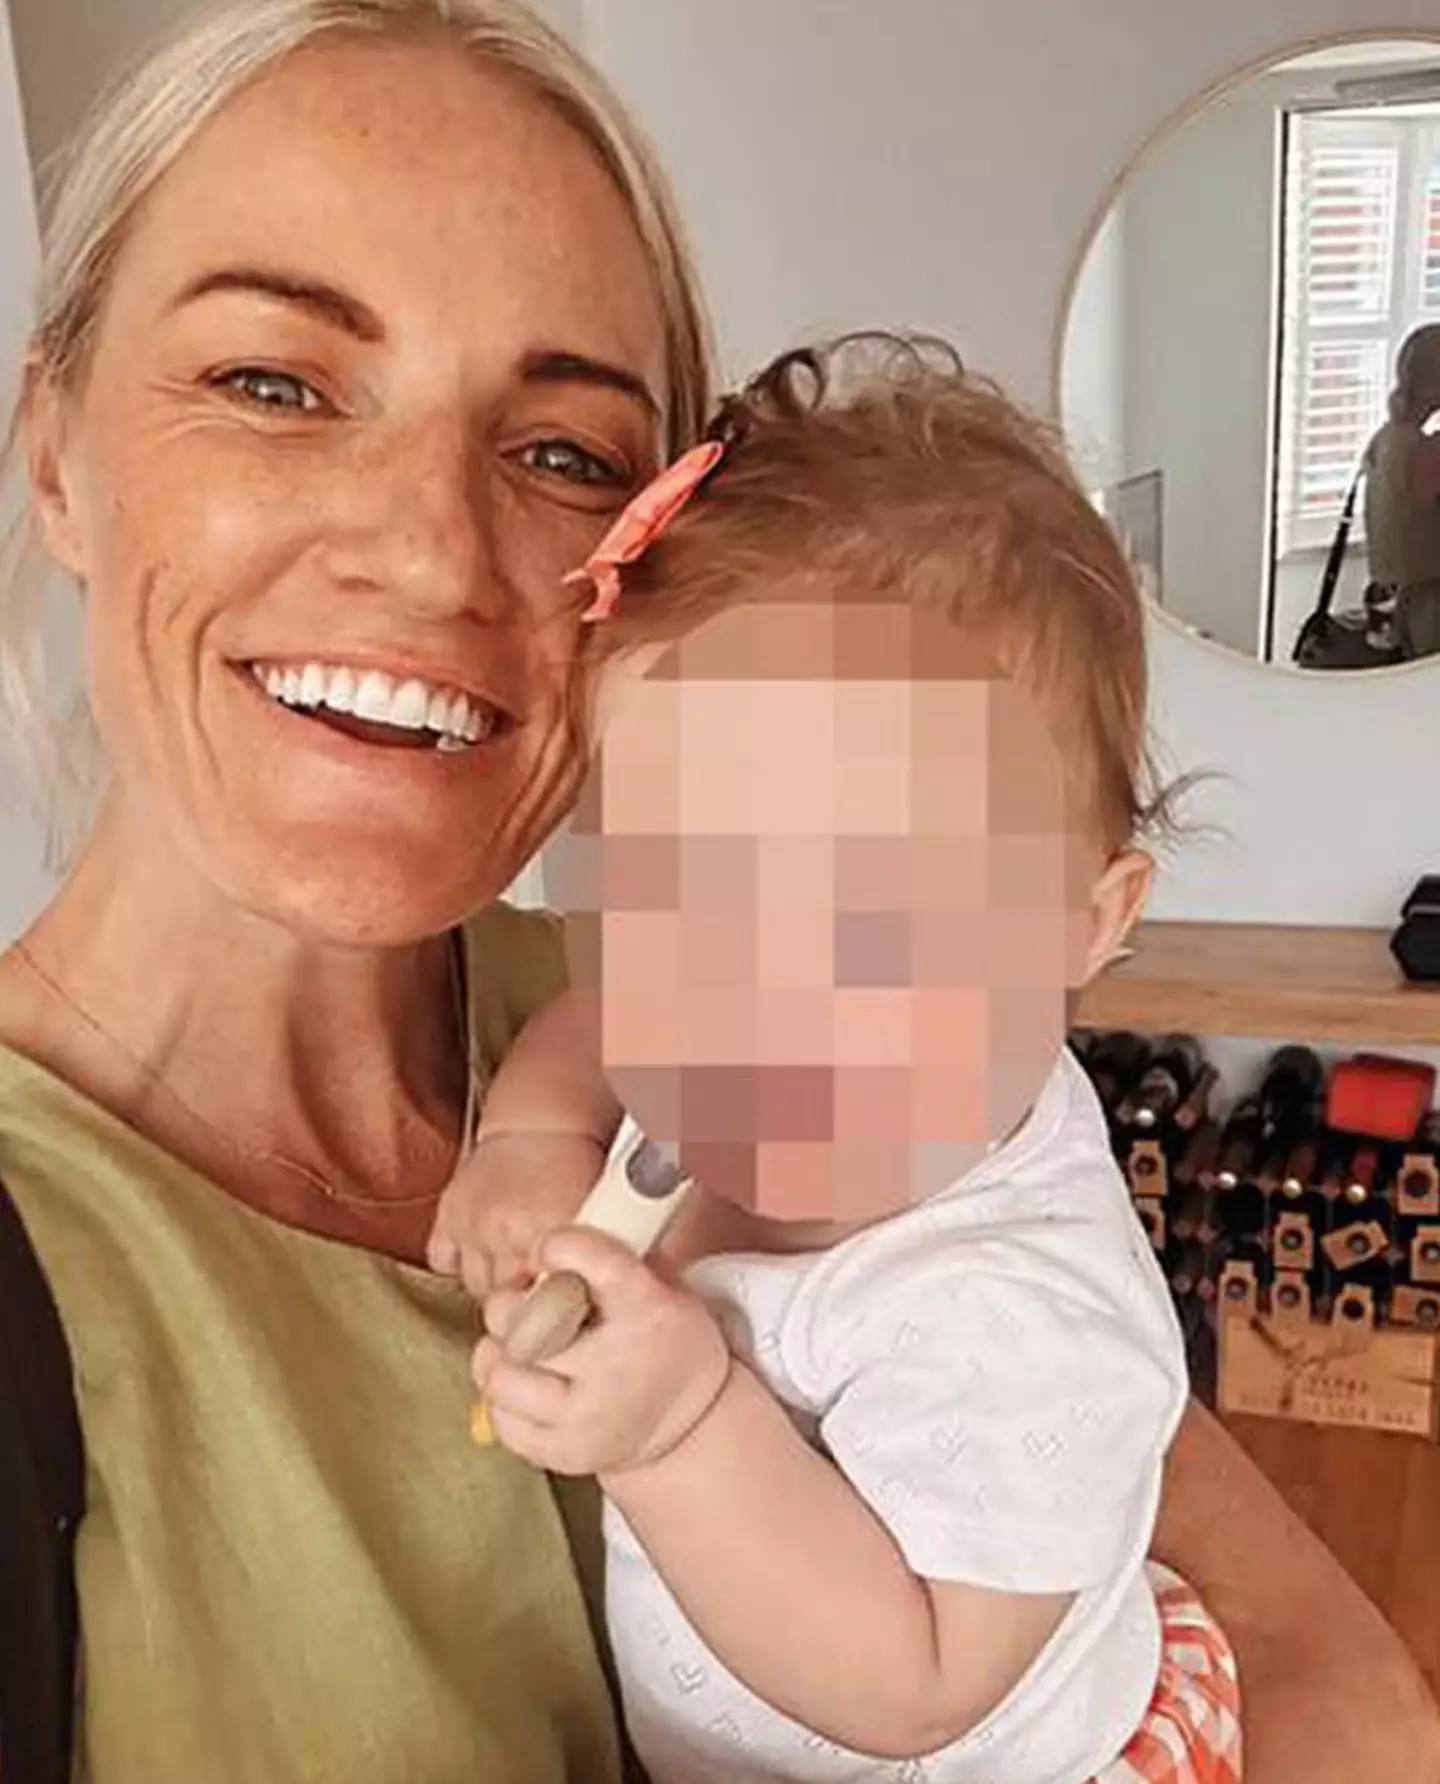 Ashlee Good was one of the victims of the Sydney Westfield attack (Instagram)